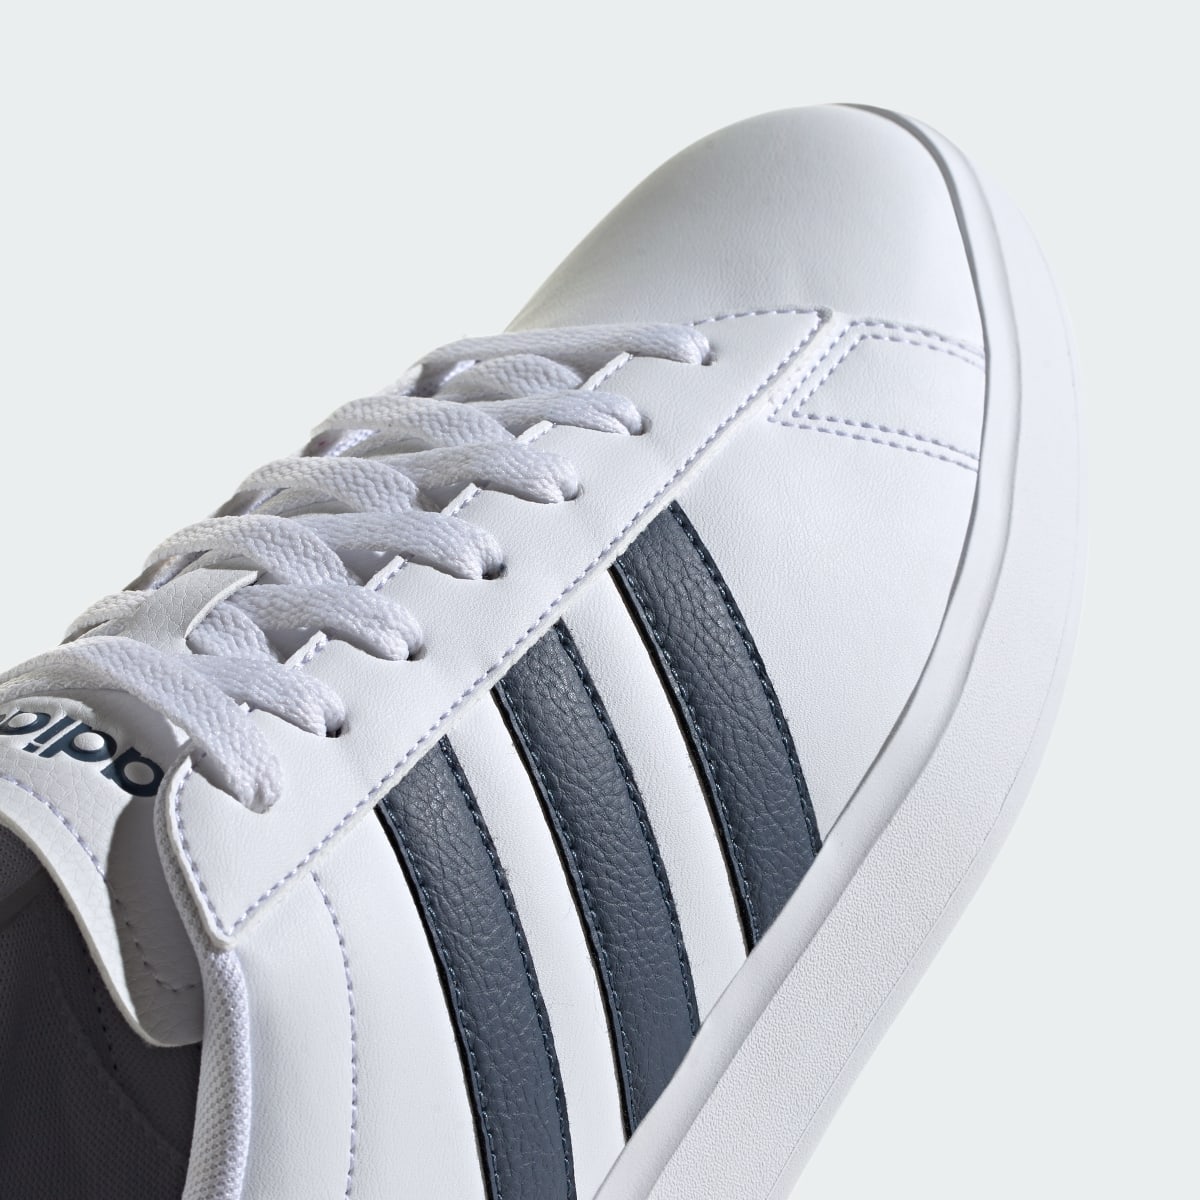 Adidas Grand Court 2.0 Shoes. 9